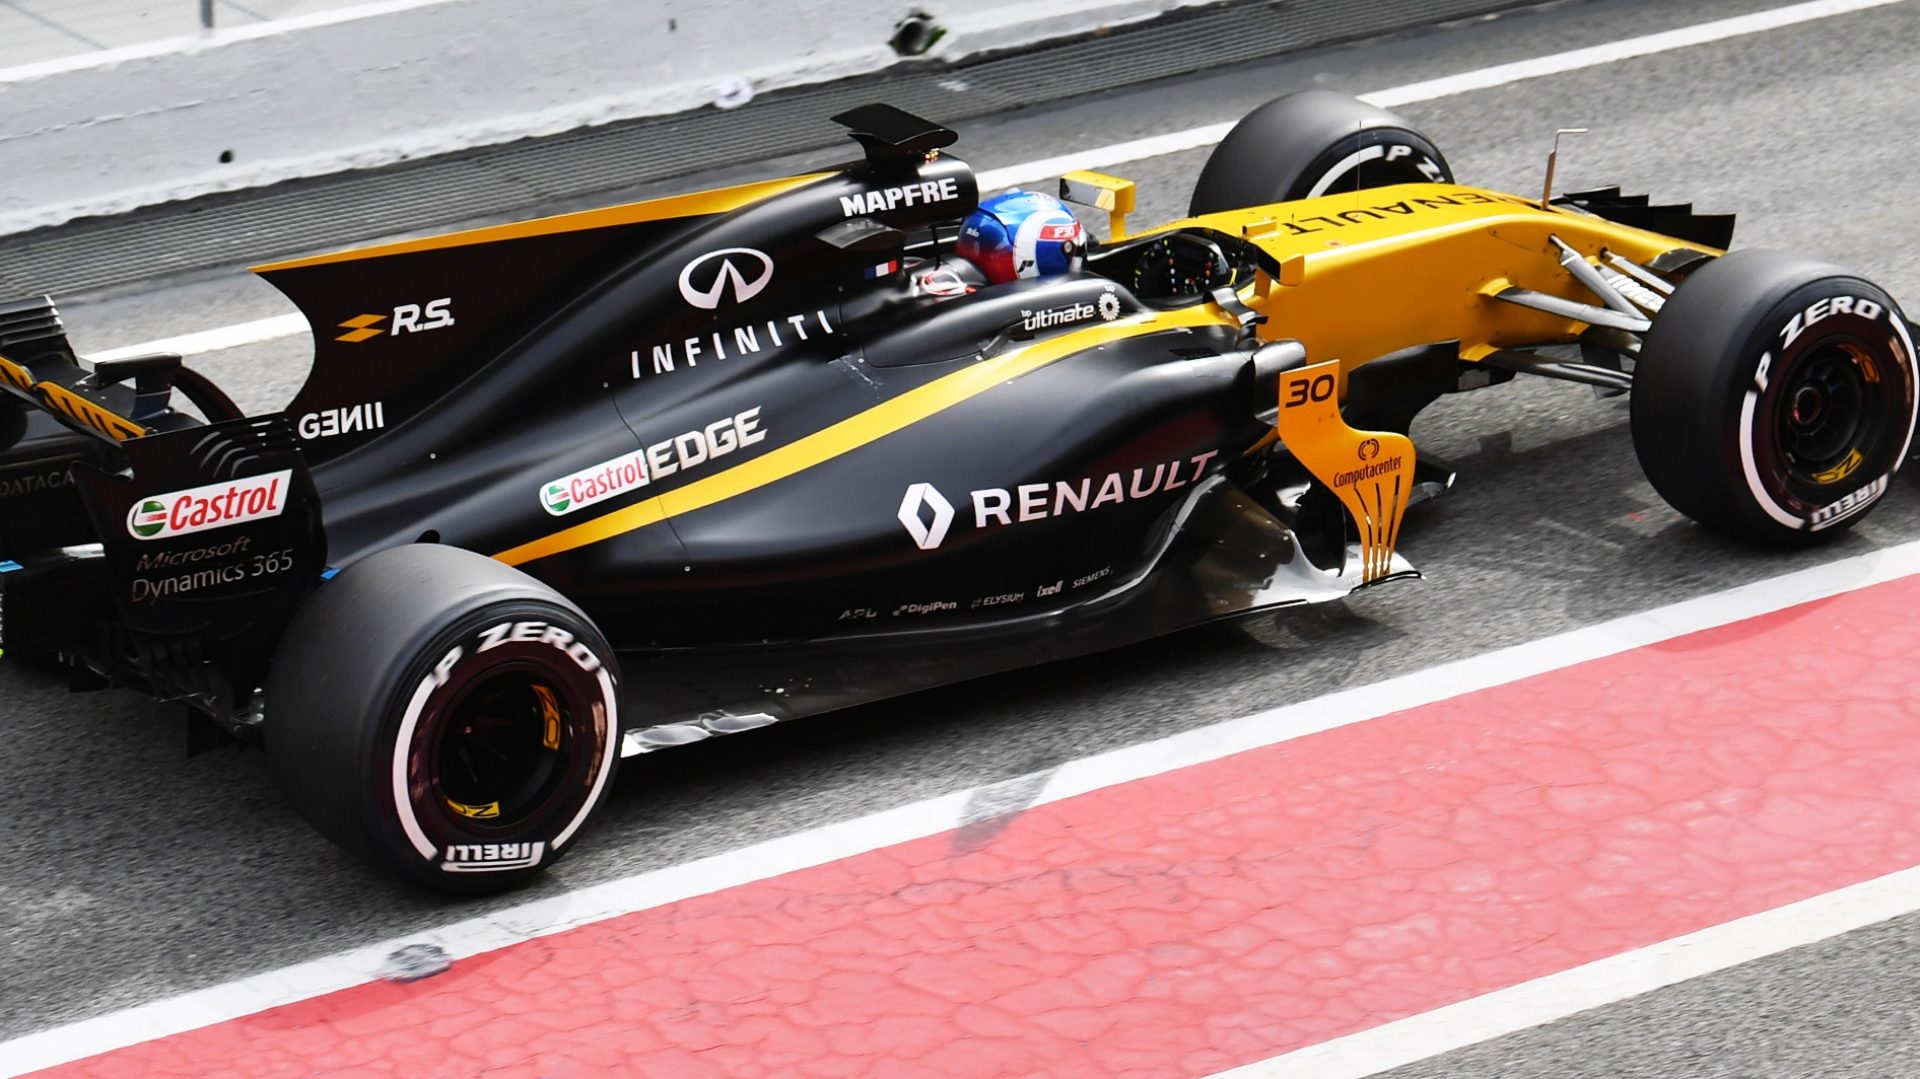 Renault is one of four engine manufacturers and one of three factory teams (building their own engine and chassis). The other factory teams, Mercedes and Ferrari, have perfected their cars over a number of years. Renault is in year two of development after a brief hiatus. Things are looking up but keep your expectations in check.